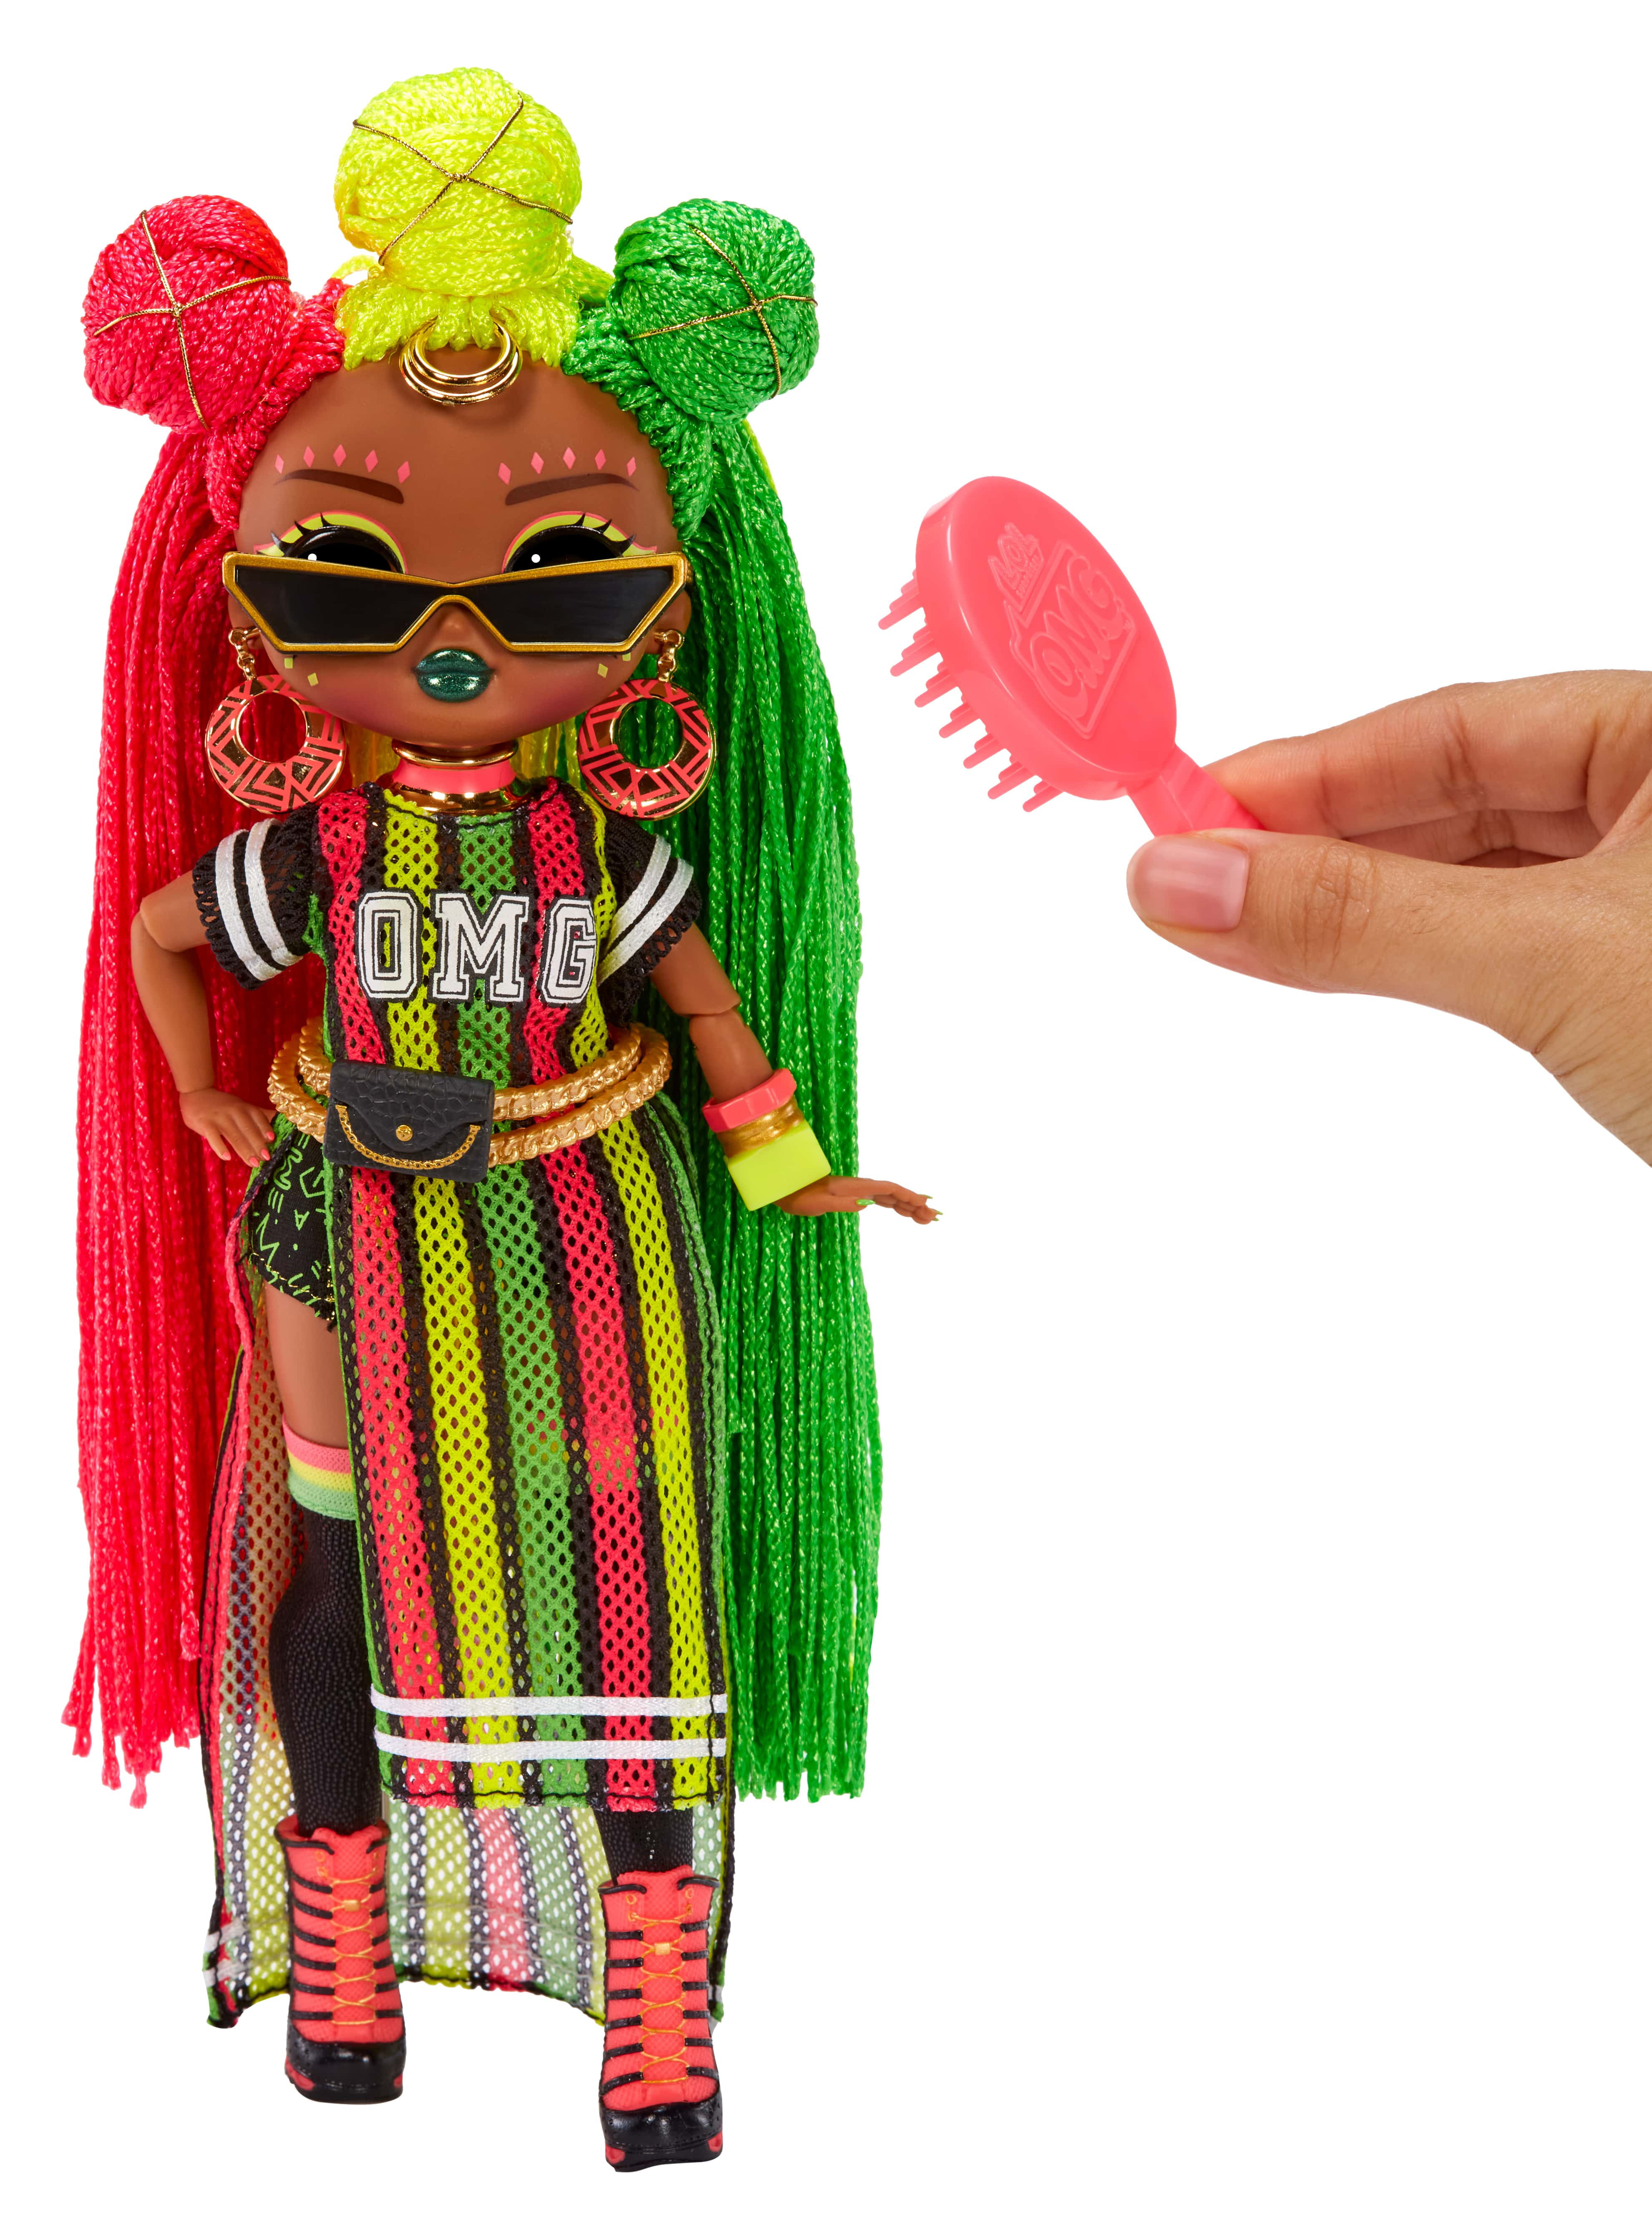 Buy Lol Surprise Omg Queens Sways Fashion Doll With 20 Surprises